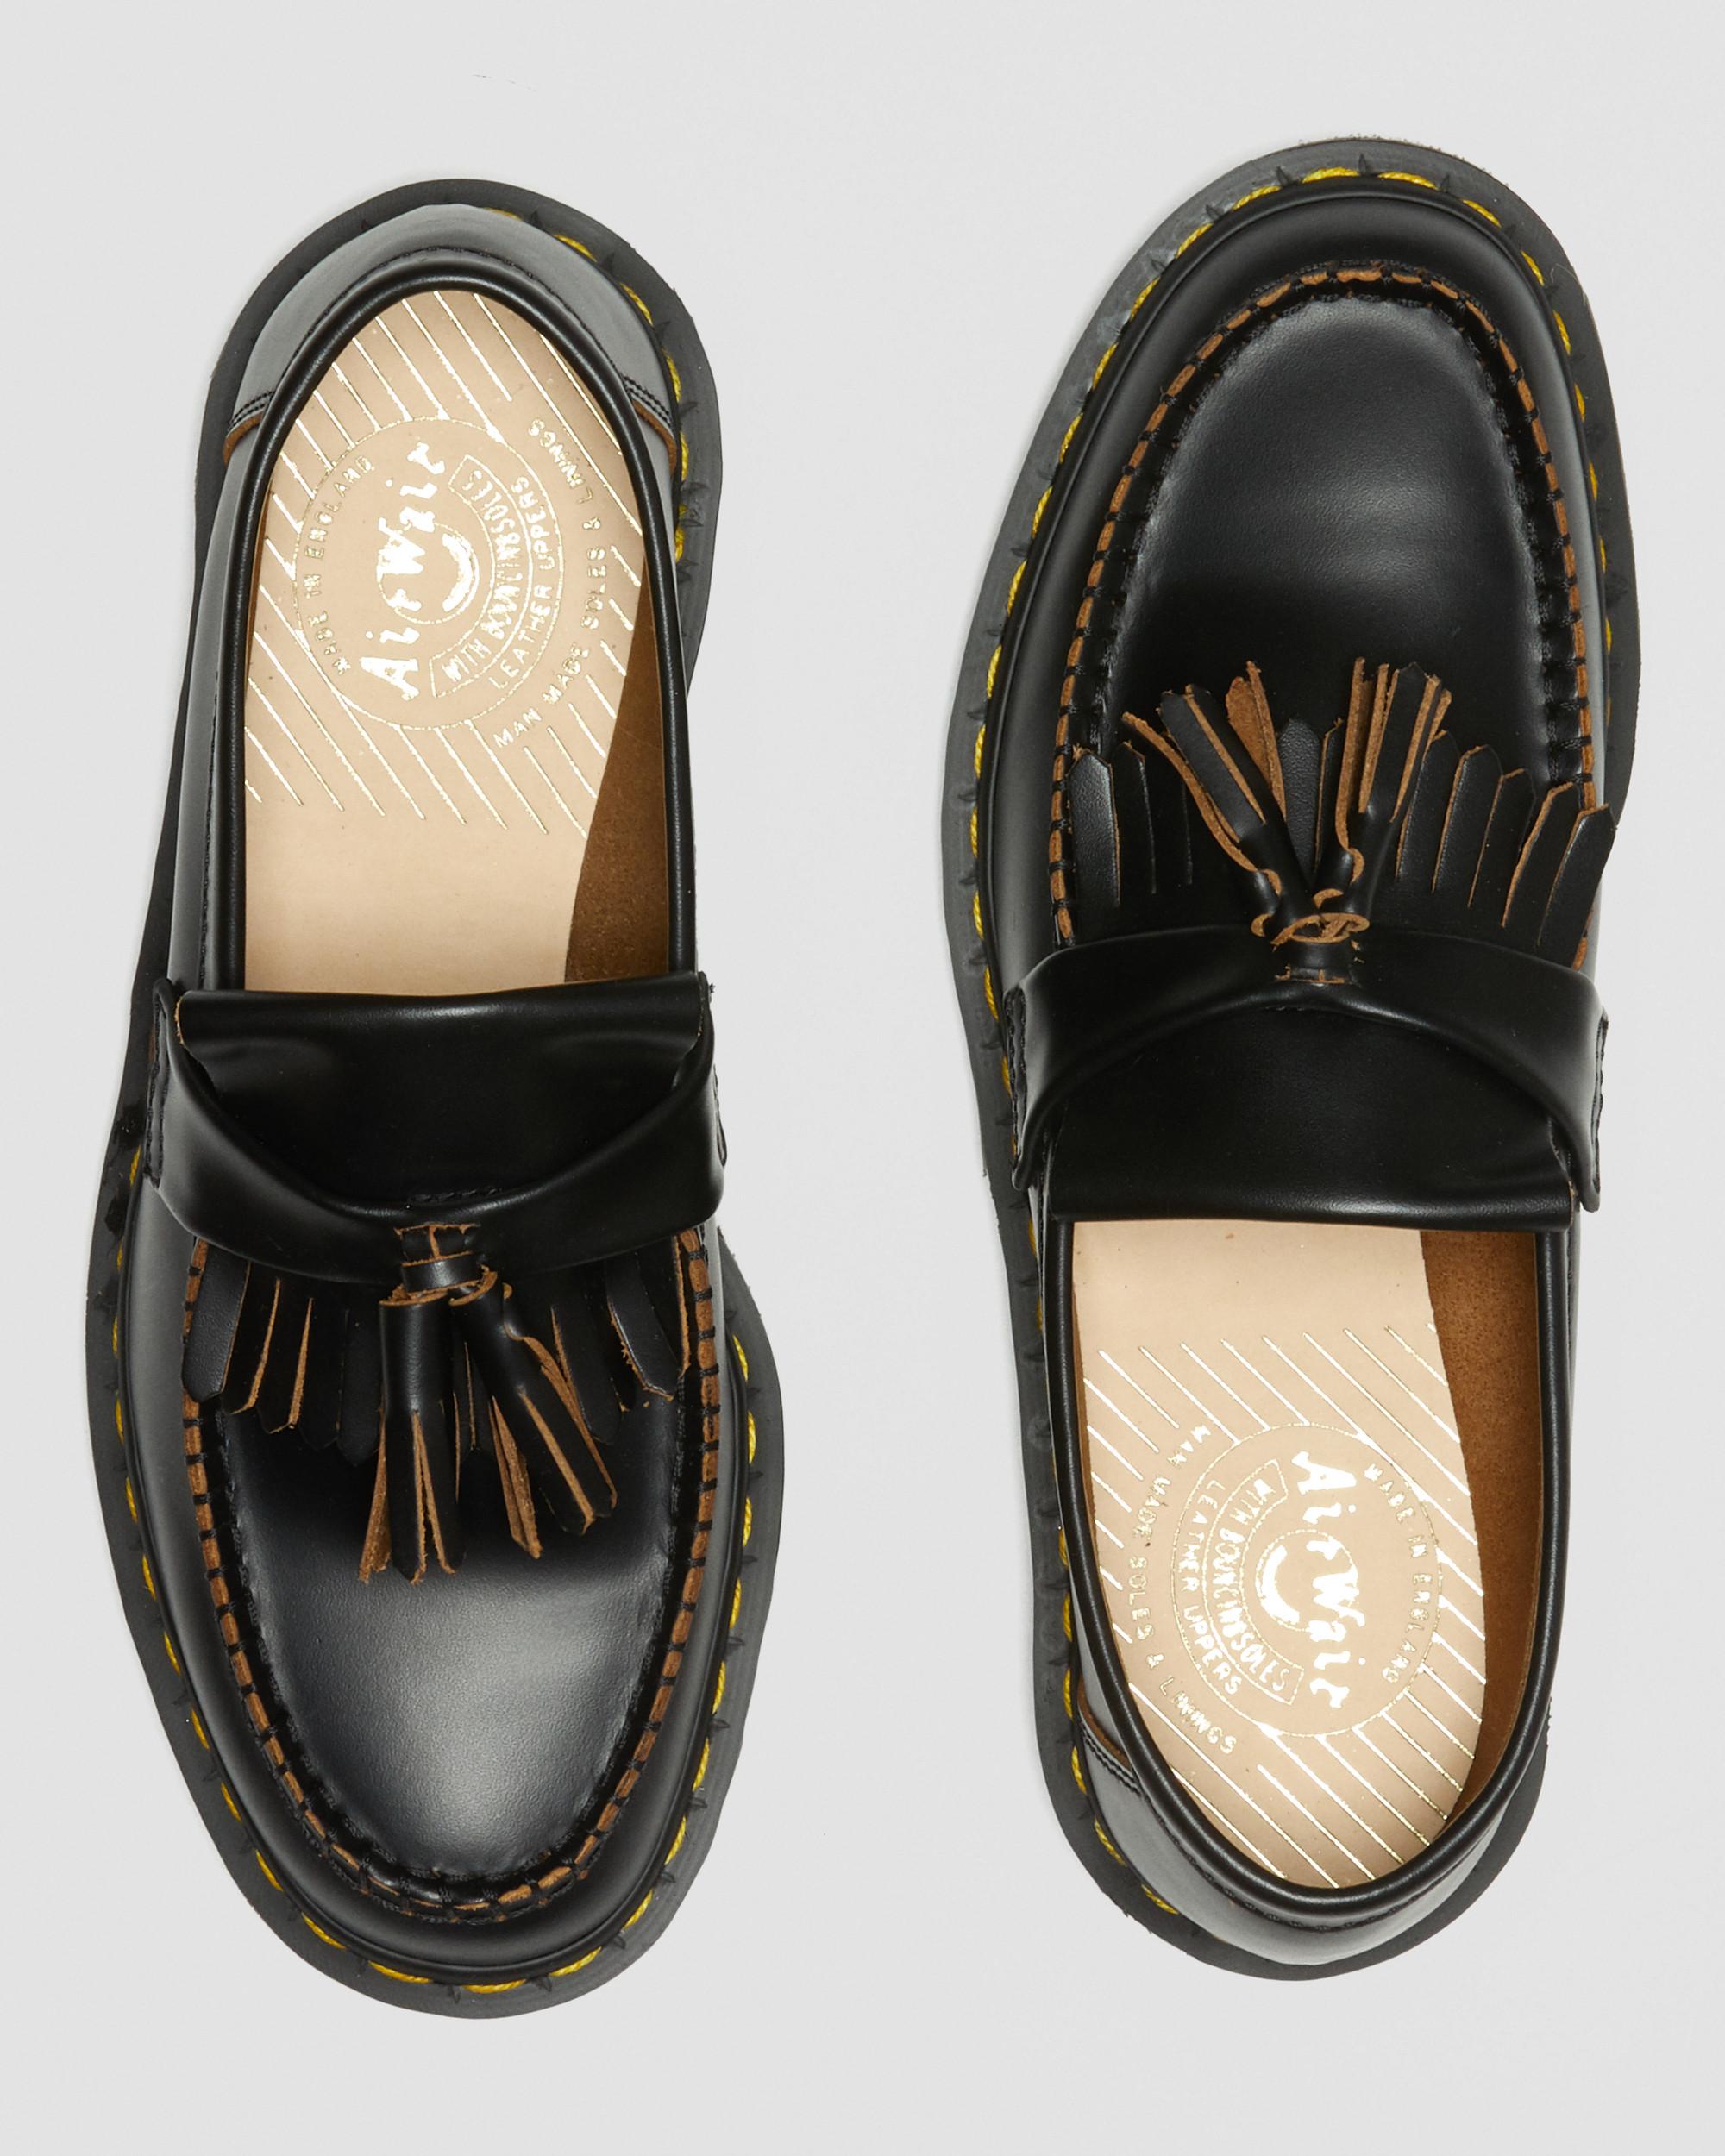 Adrian Made in England Vintage Leather Tassel Loafers | Dr. Martens